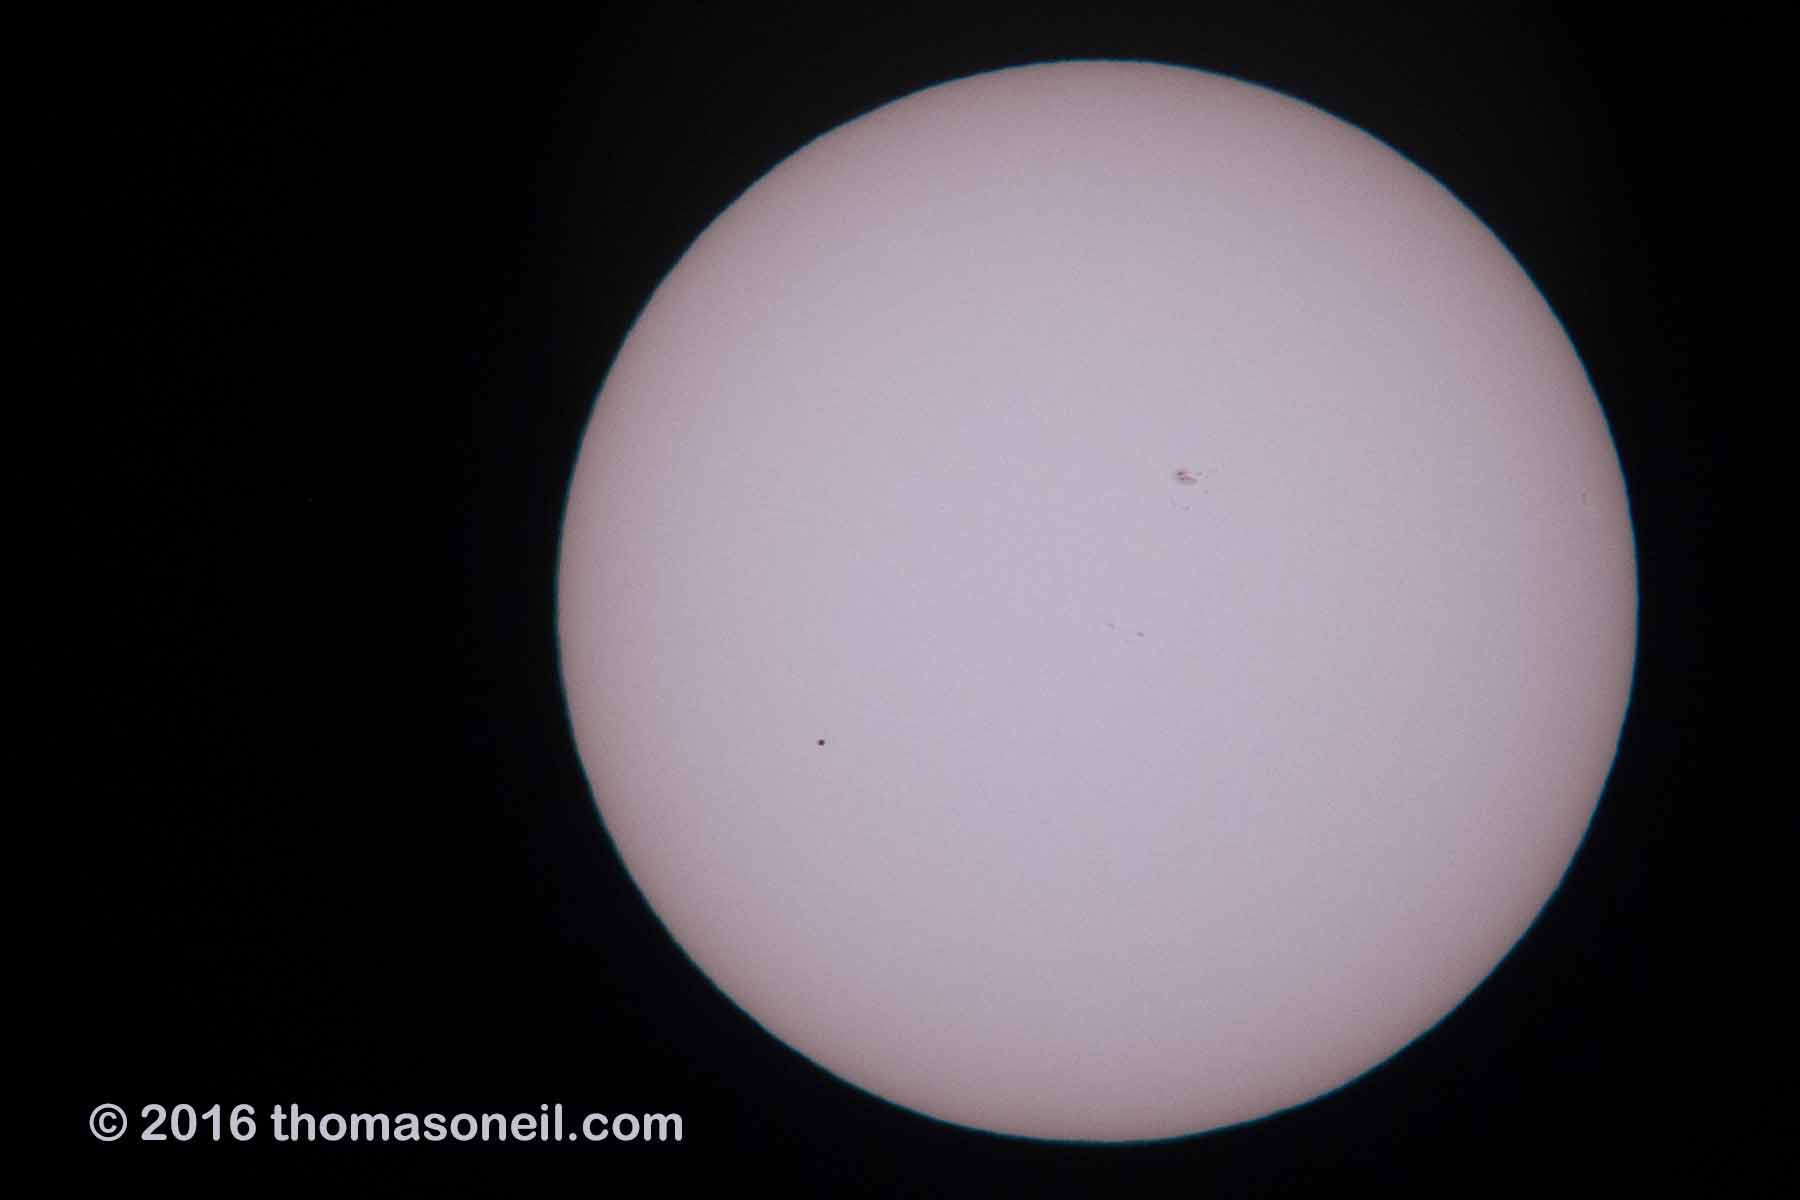 A bad image of the Transit of Mercury, May 9, 2016, shot with the old G6 camera through Televue 85 telescope.  Mercury is the dot toward the lower left.  The day was mostly cloudy/hazy and I was surprised to get anything at all.  For some of my better sun images, see the Partial Eclipse from 2014, the Transit of Venus from 2004, or the Annual Eclipse as seen from Iceland in 2003.  Click for next photo.